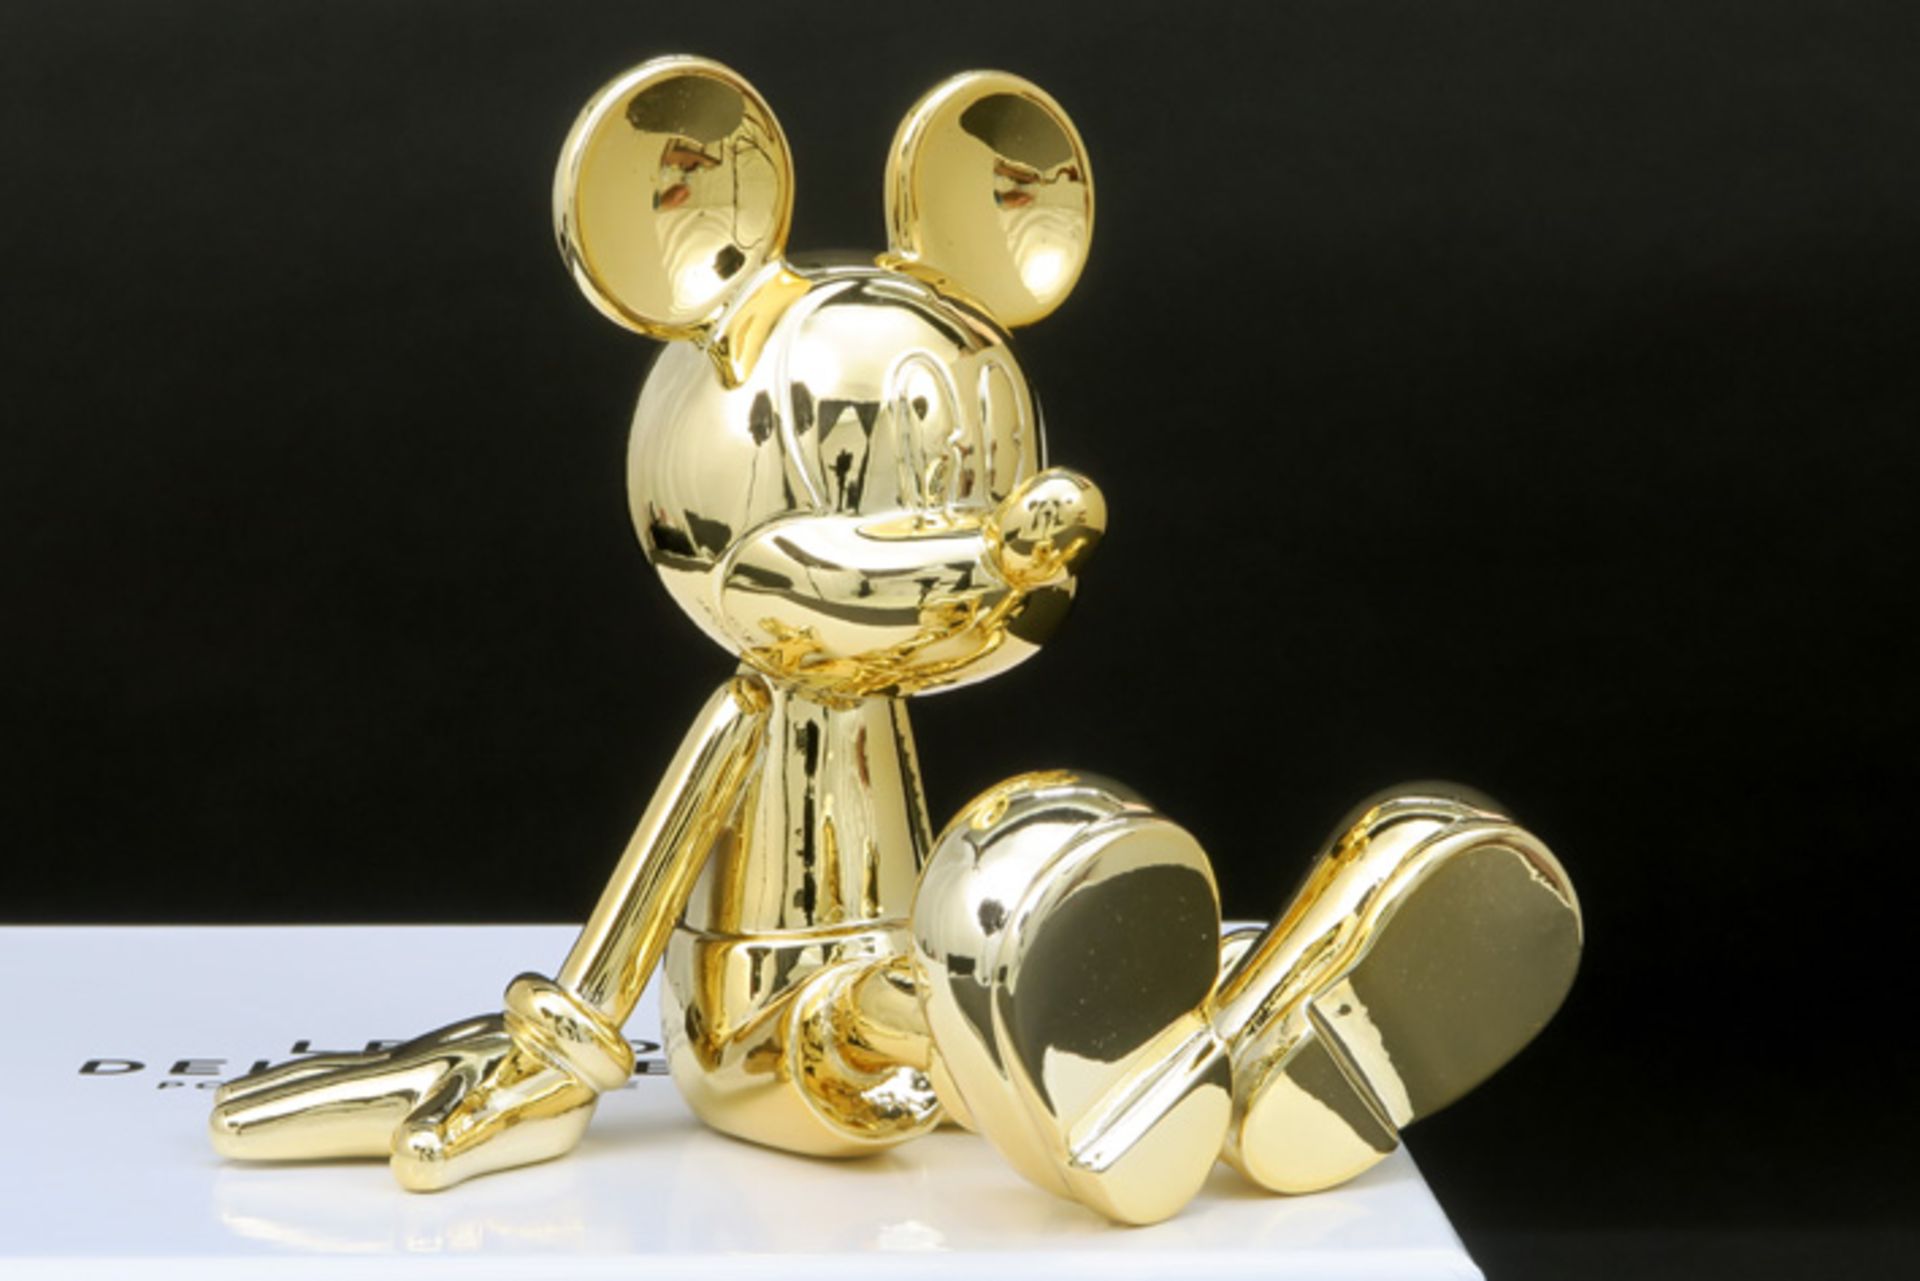 Marcel Wanders "sitting Mickey" sculpture in resin - marked and with certificate||WANDERS - Image 2 of 5